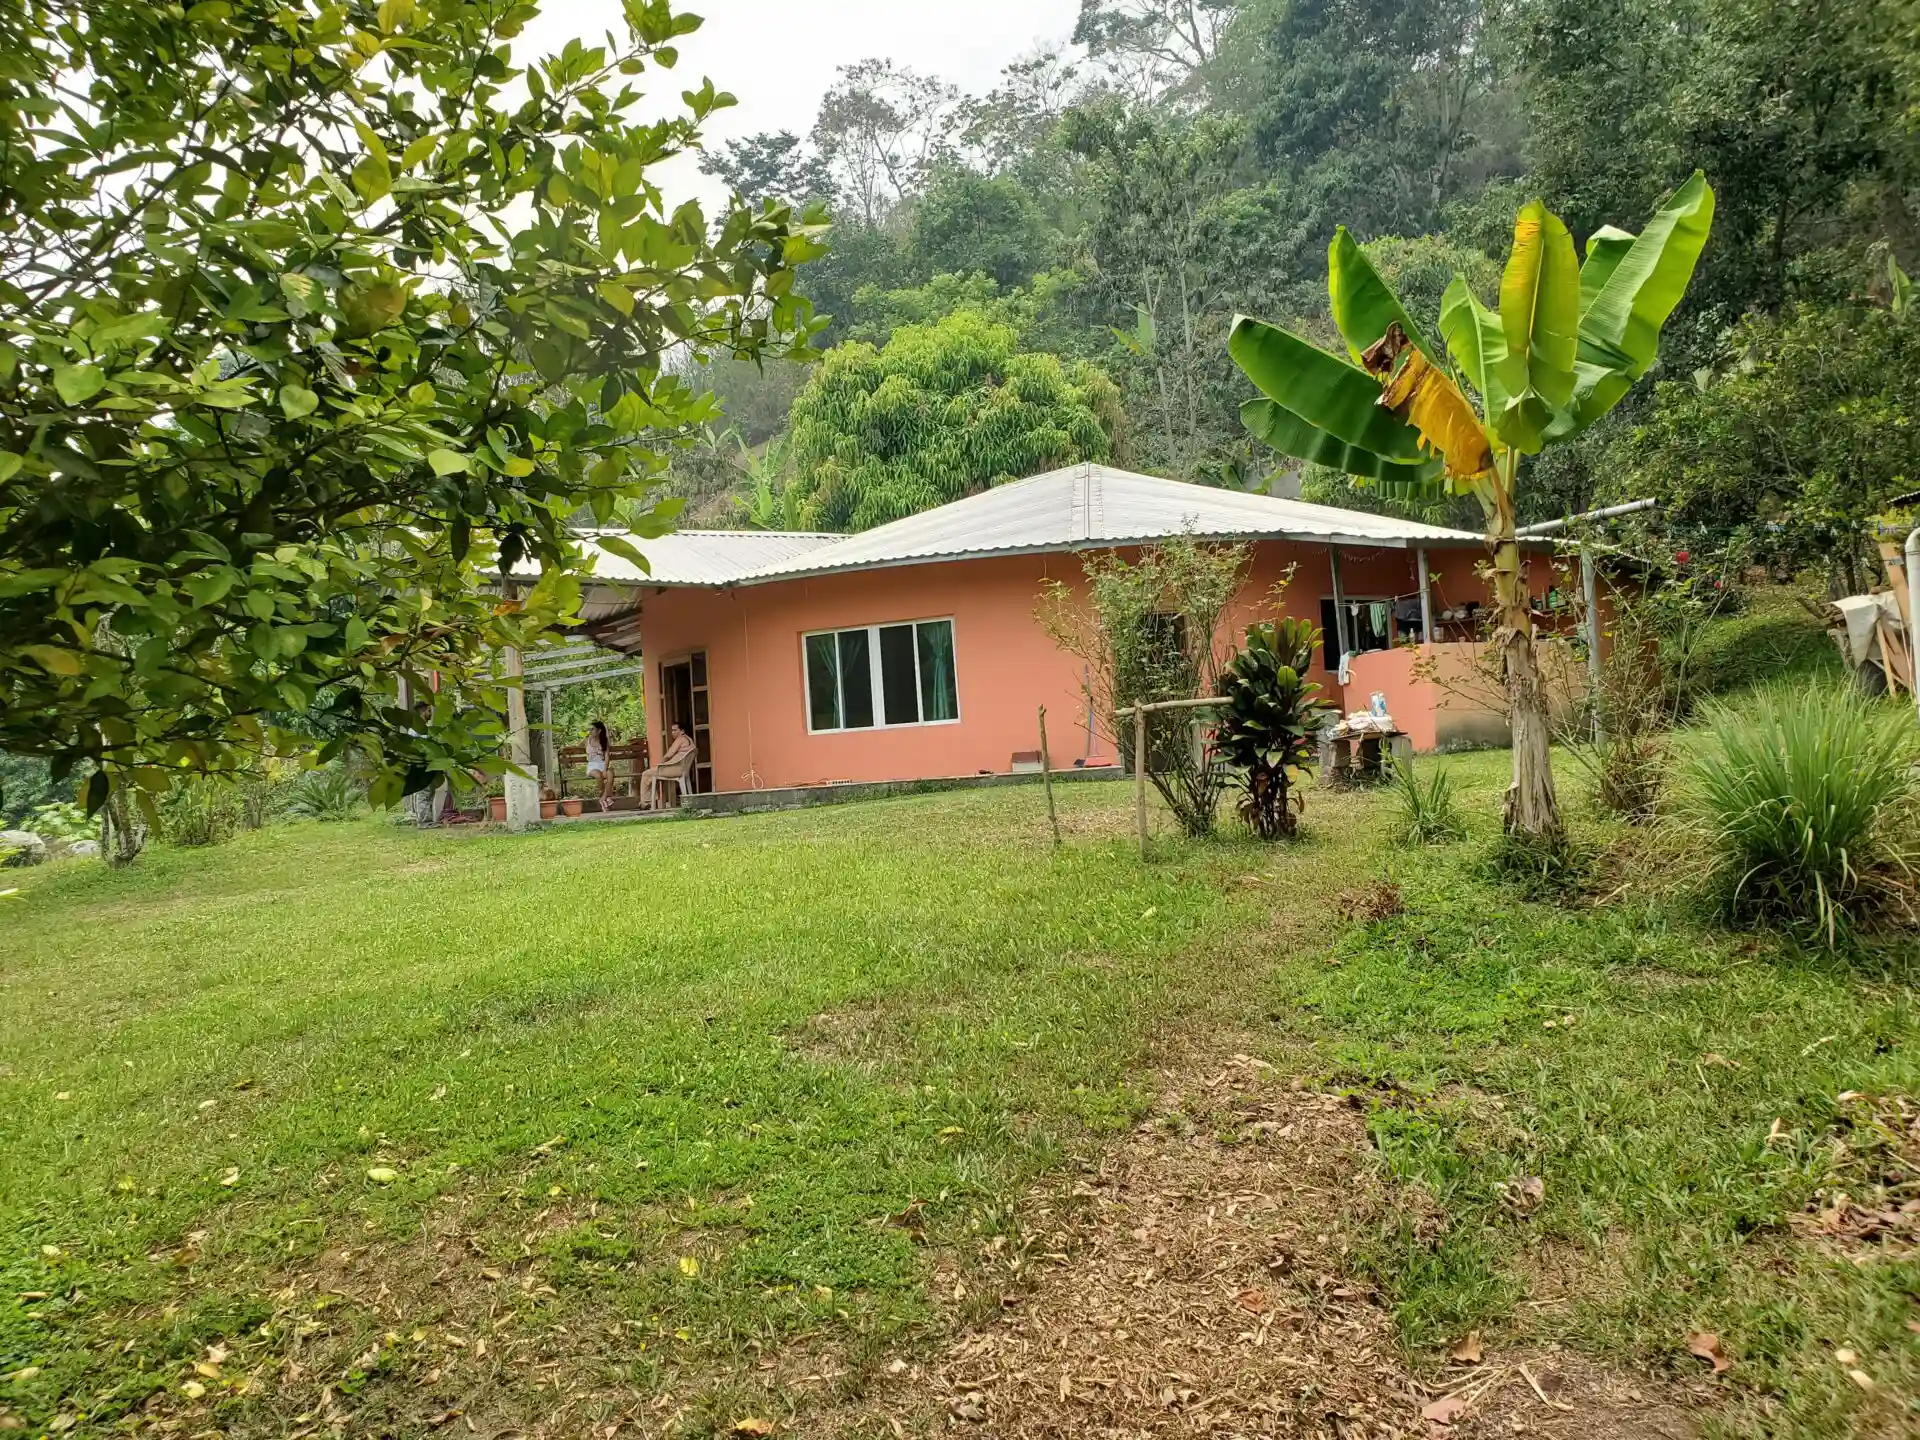 A house near a forest with a garden in front